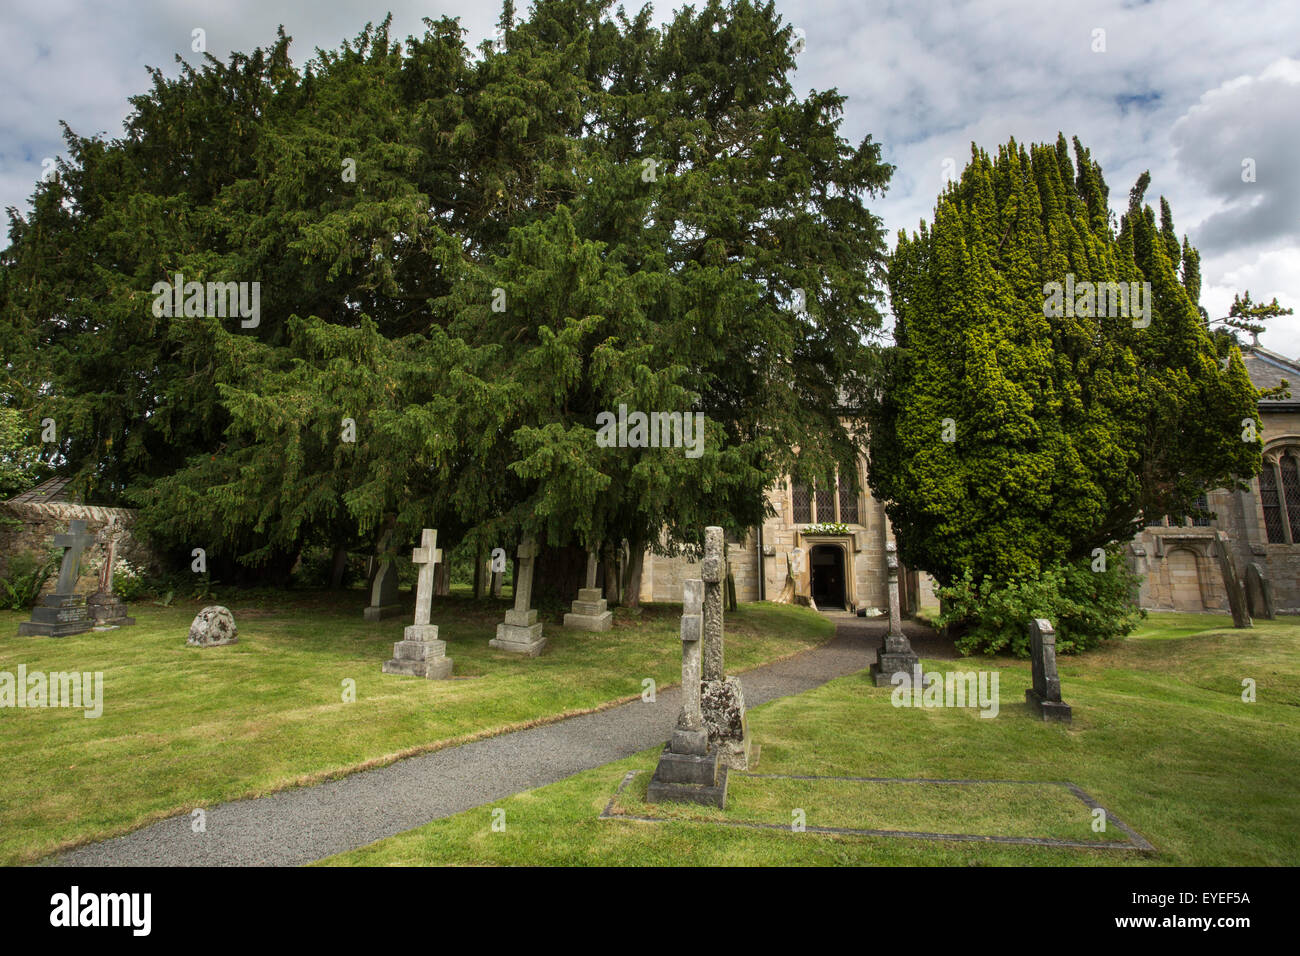 Ancient common yew trees (Taxus baccata), in the churchyard of St Cuthbert's, Beltingham, Northumberland, UK Stock Photo